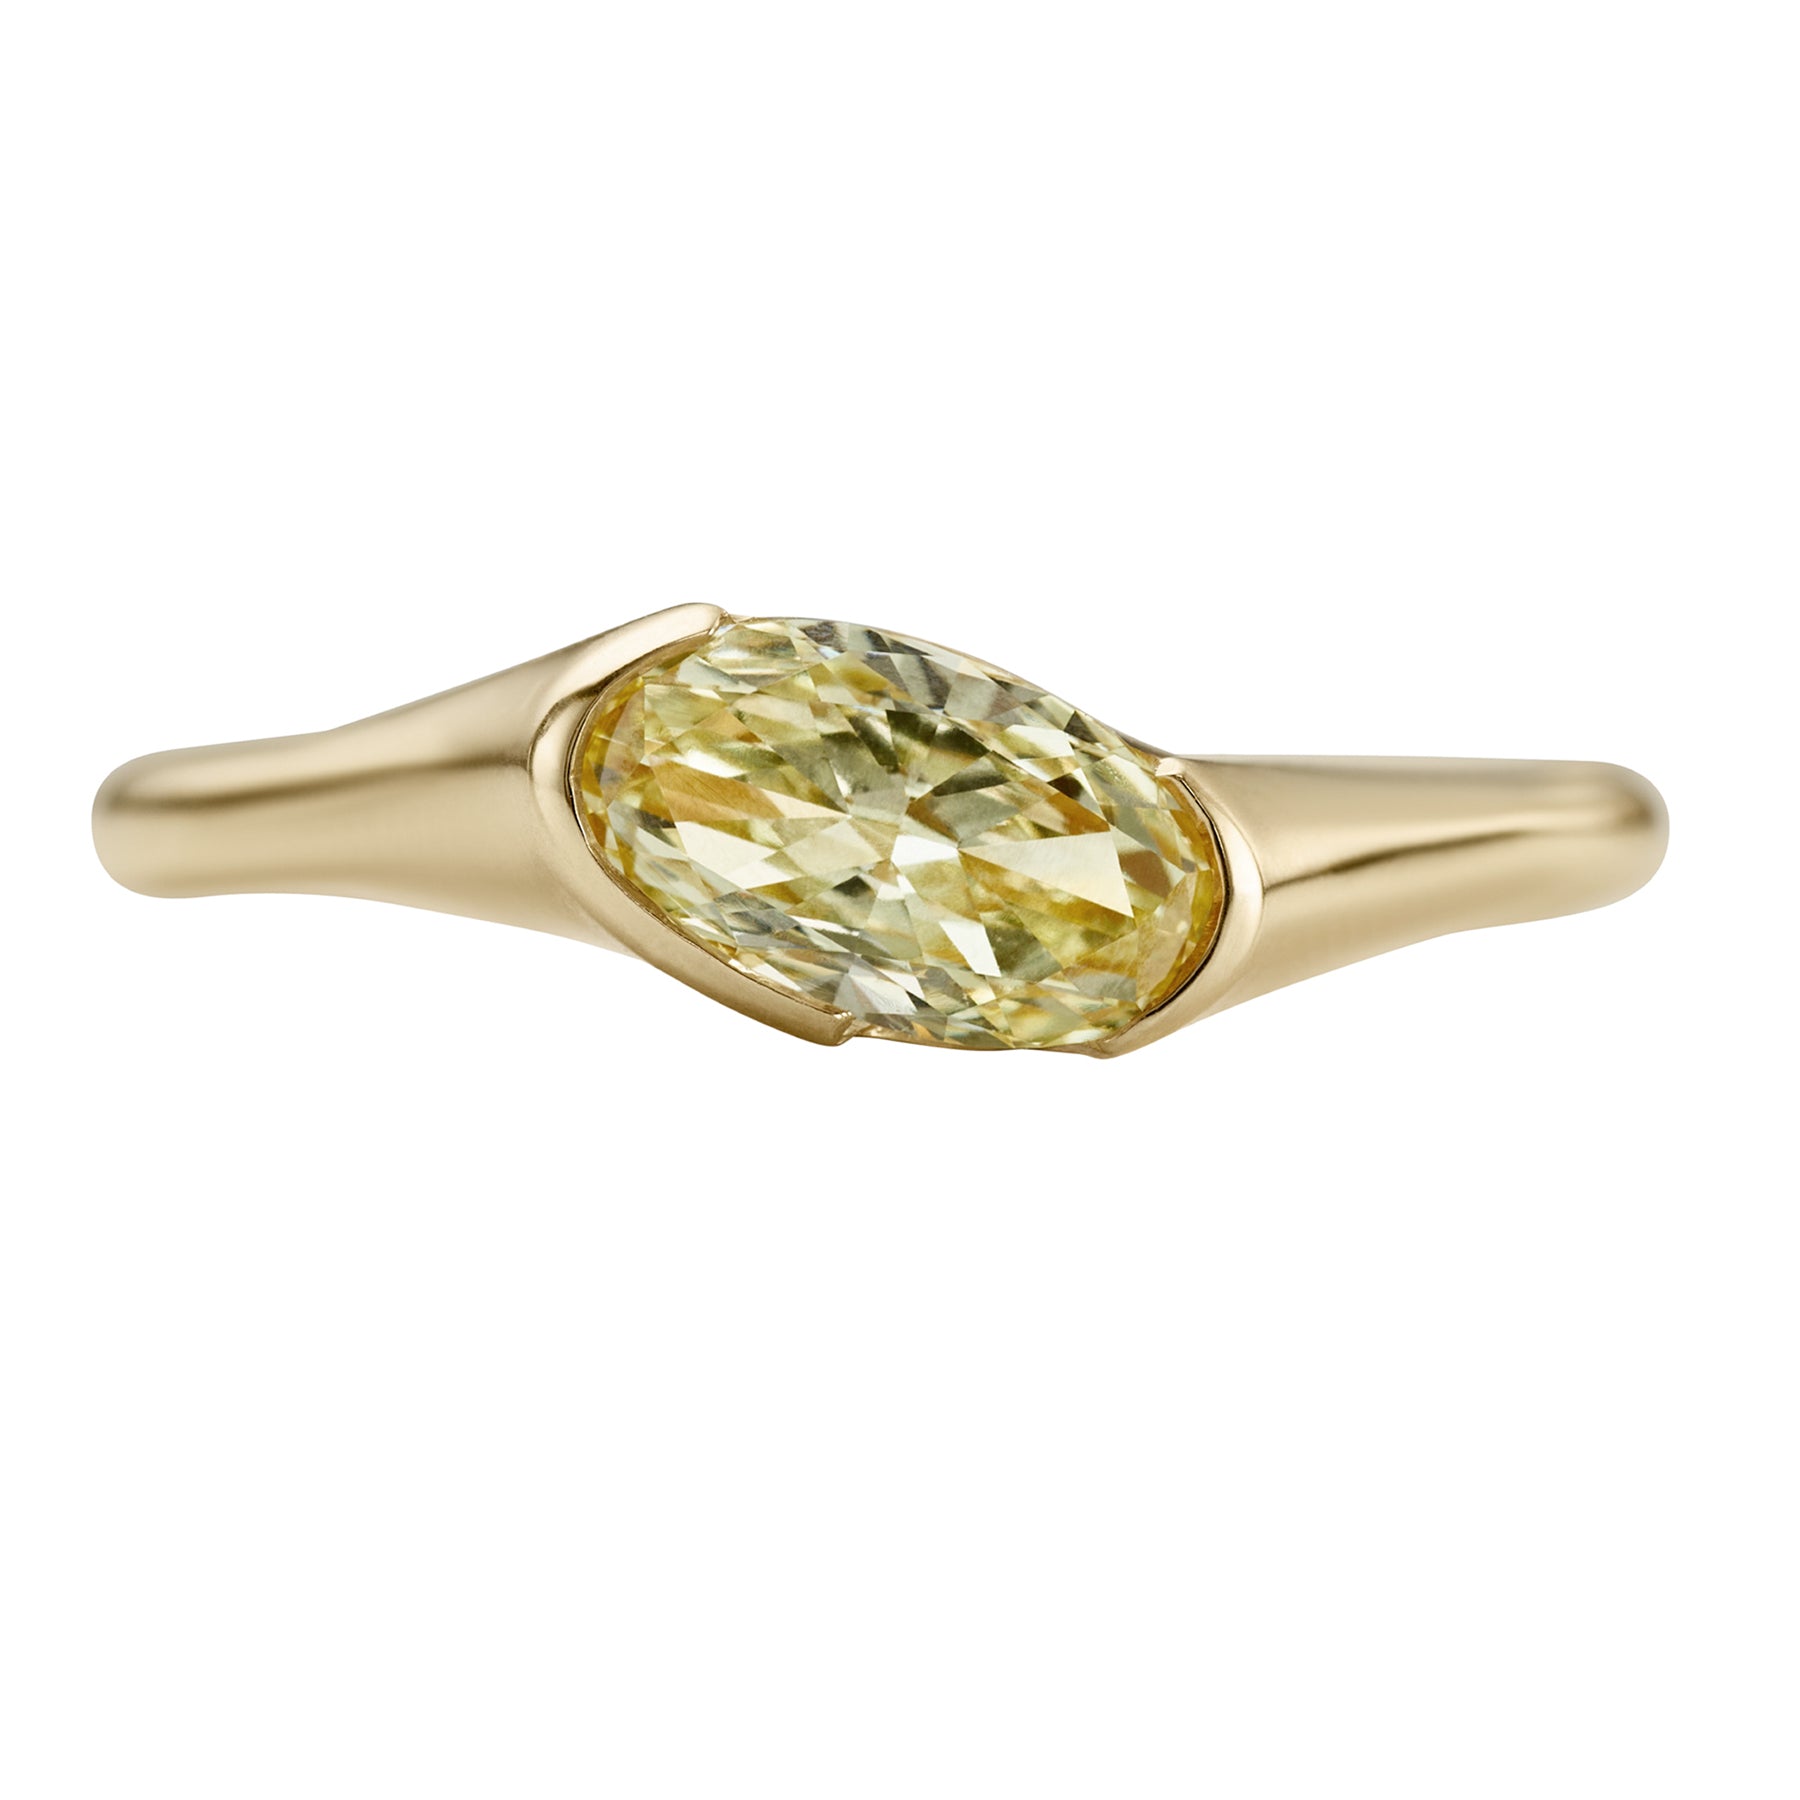 OOAK-Fancy-Yellow-Moval-Diamond-Engagement-Ring-CLOSEUP